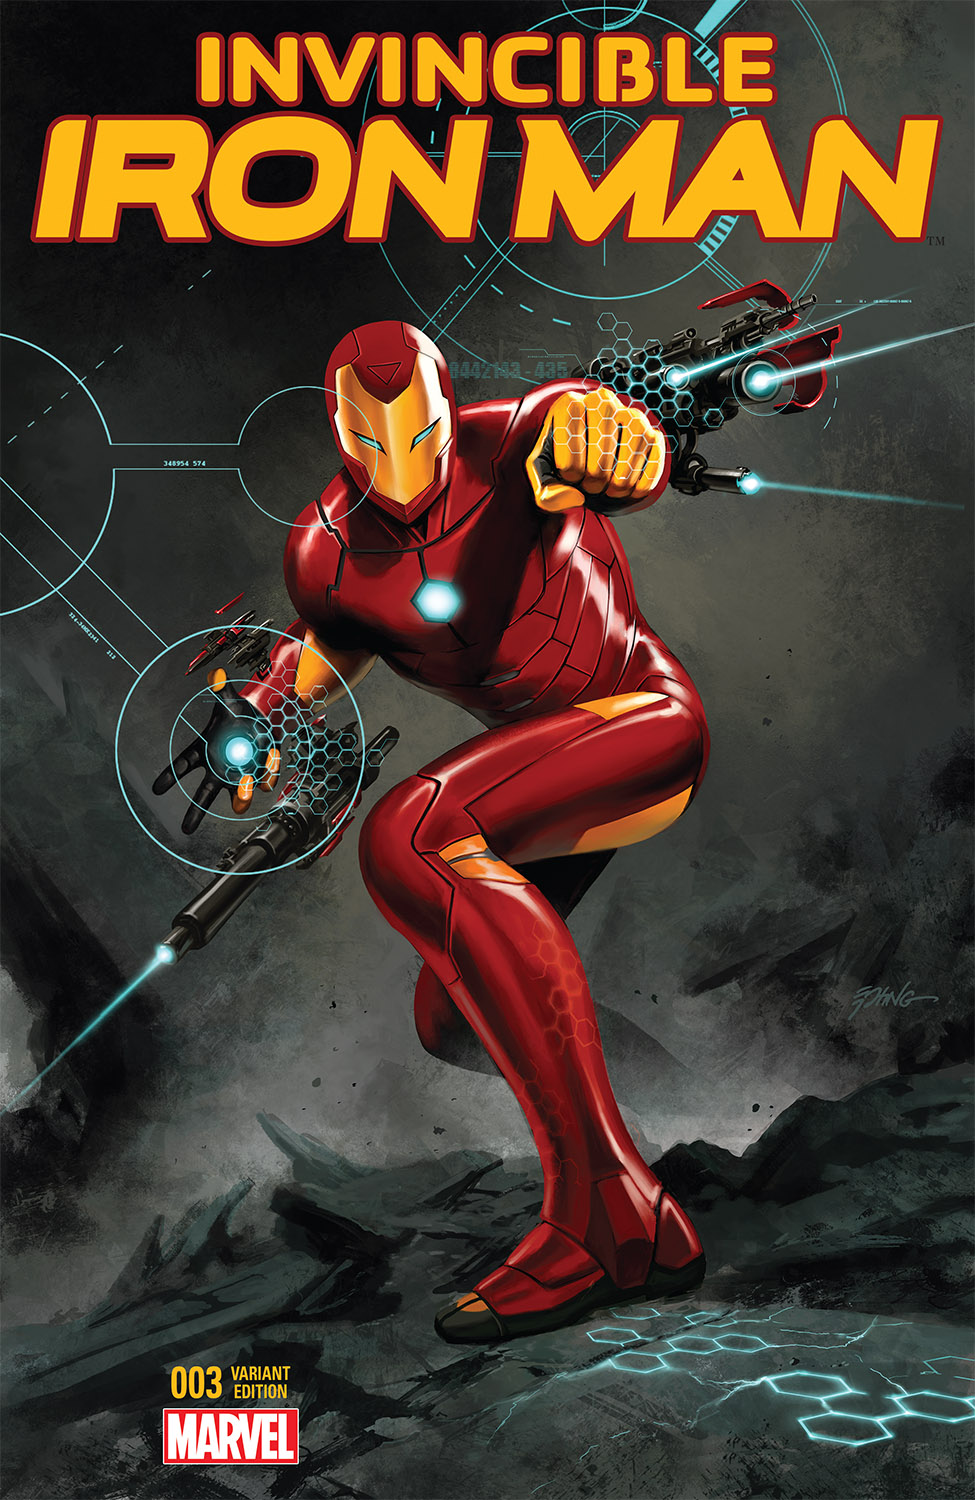 Invincible Iron Man (2015) #3 (Epting Variant)